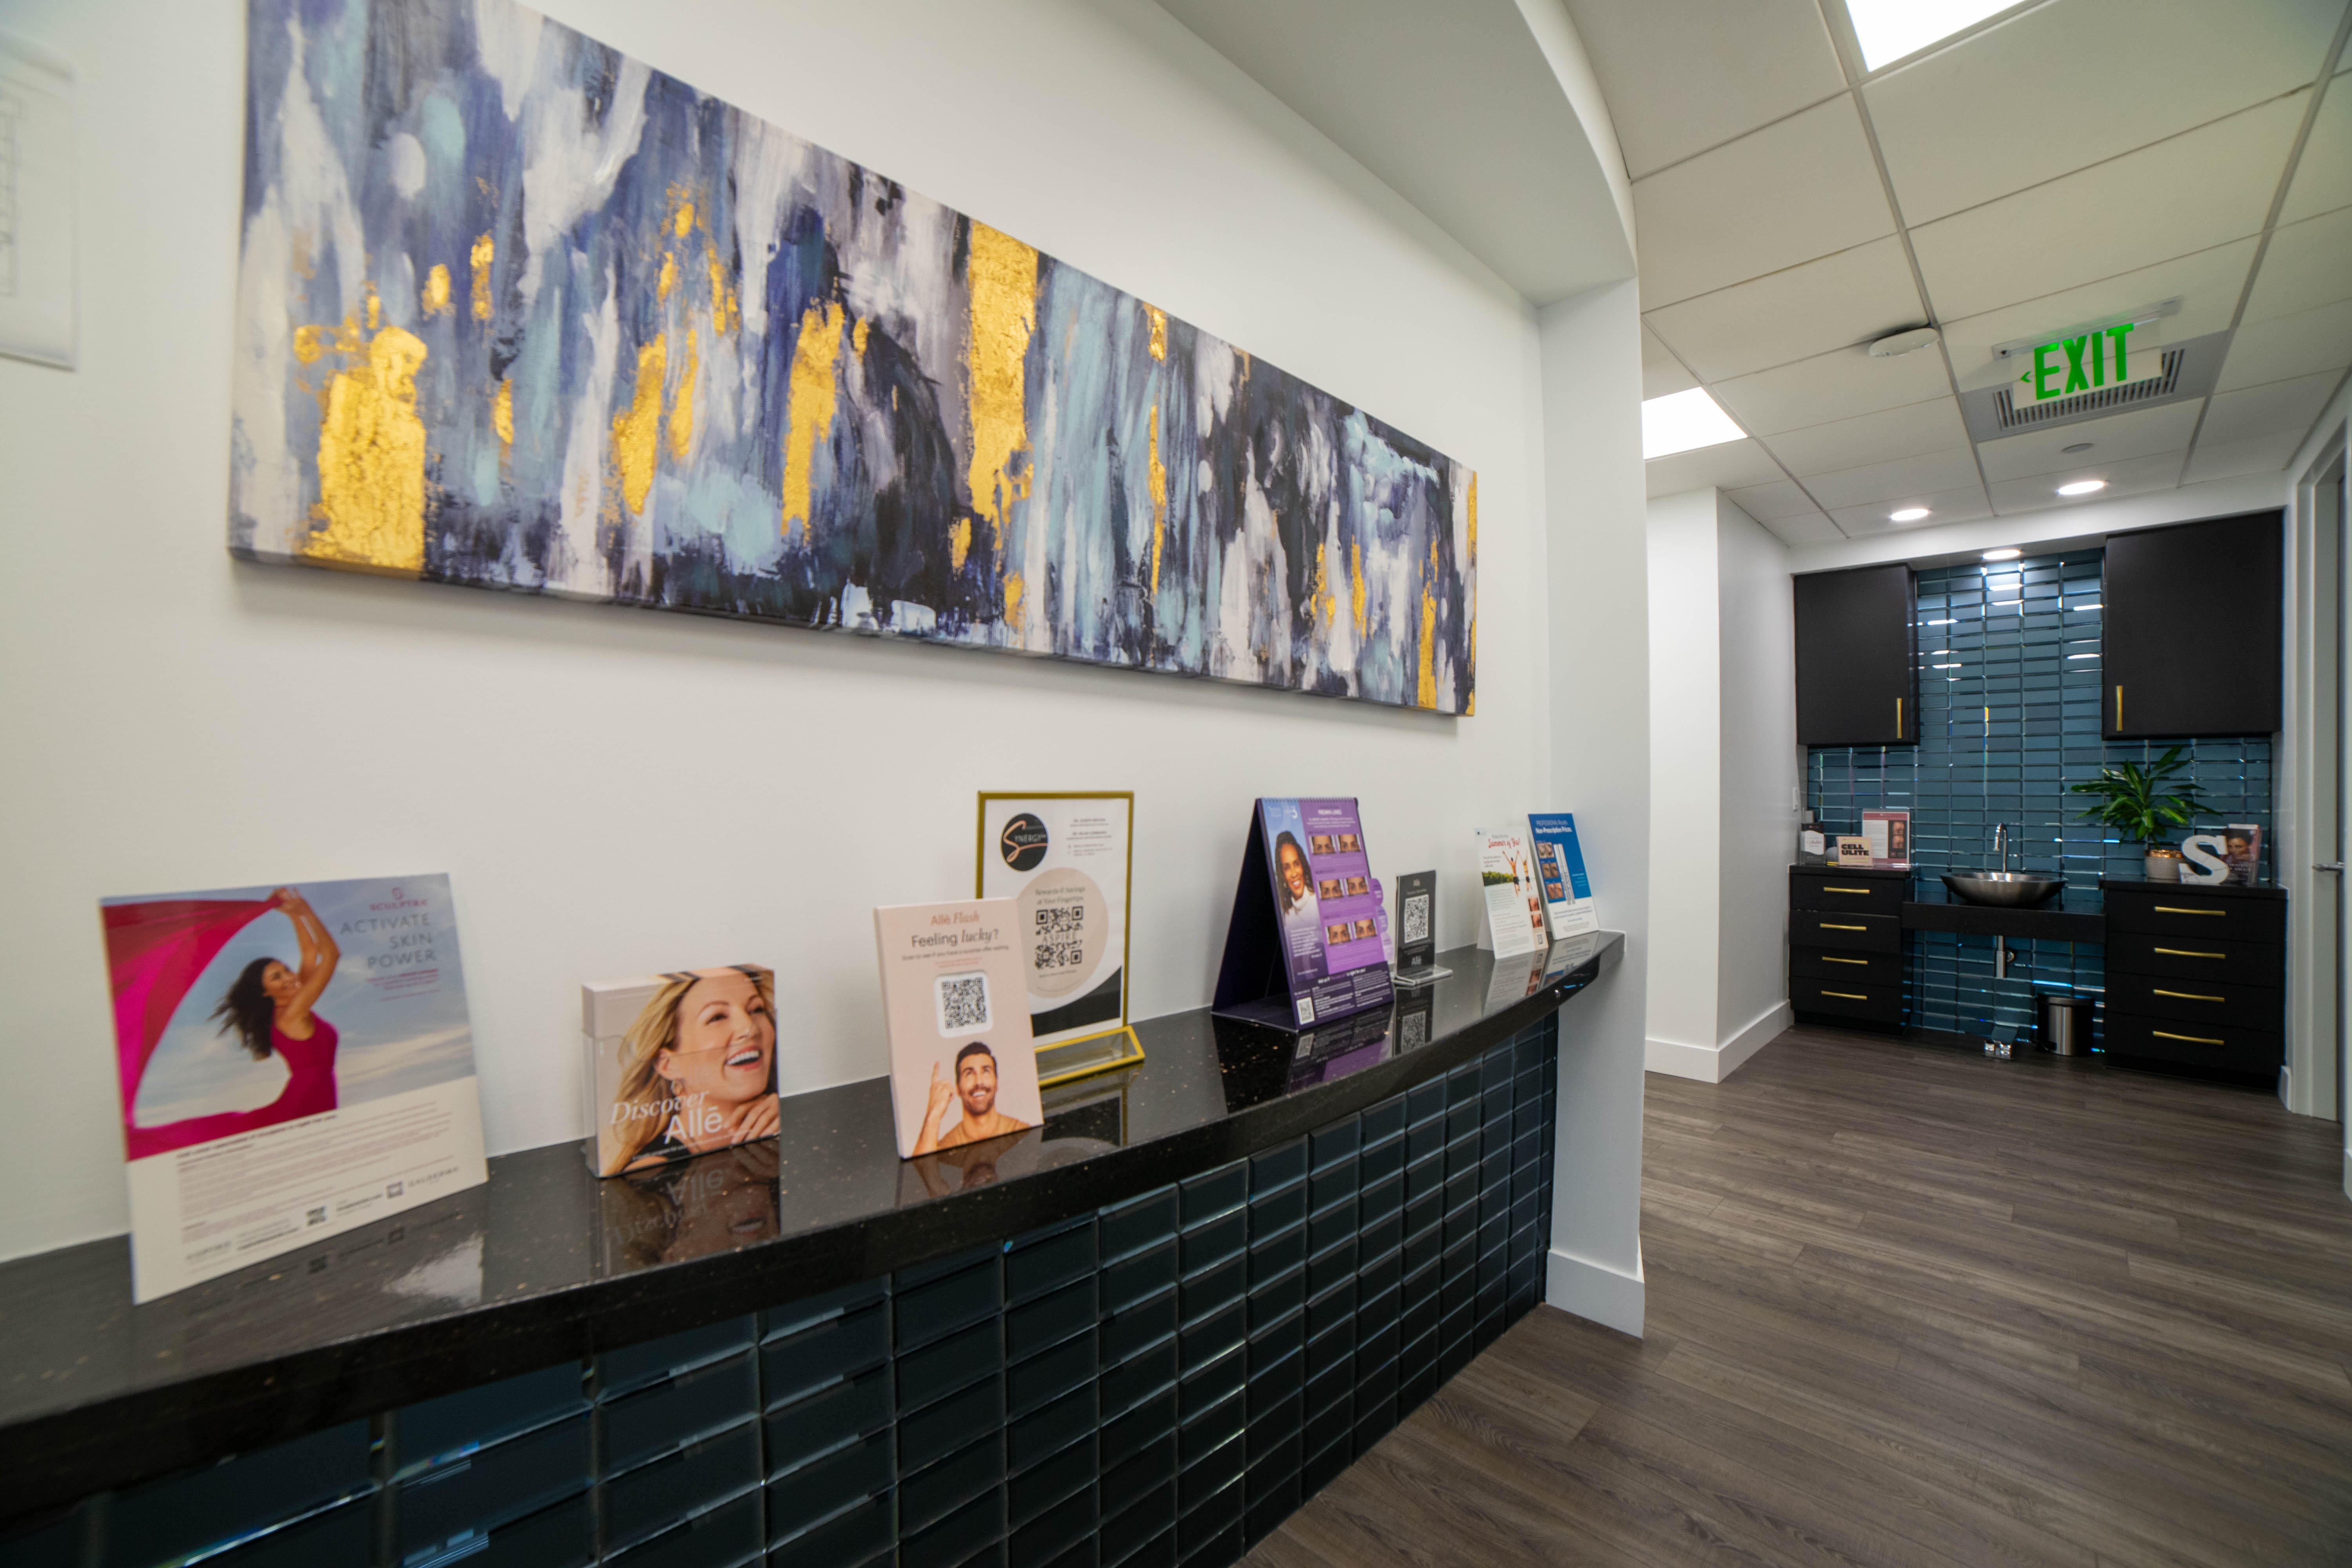 Interior of SynergyMD Cosmetic Dermatology | Tampa, FL